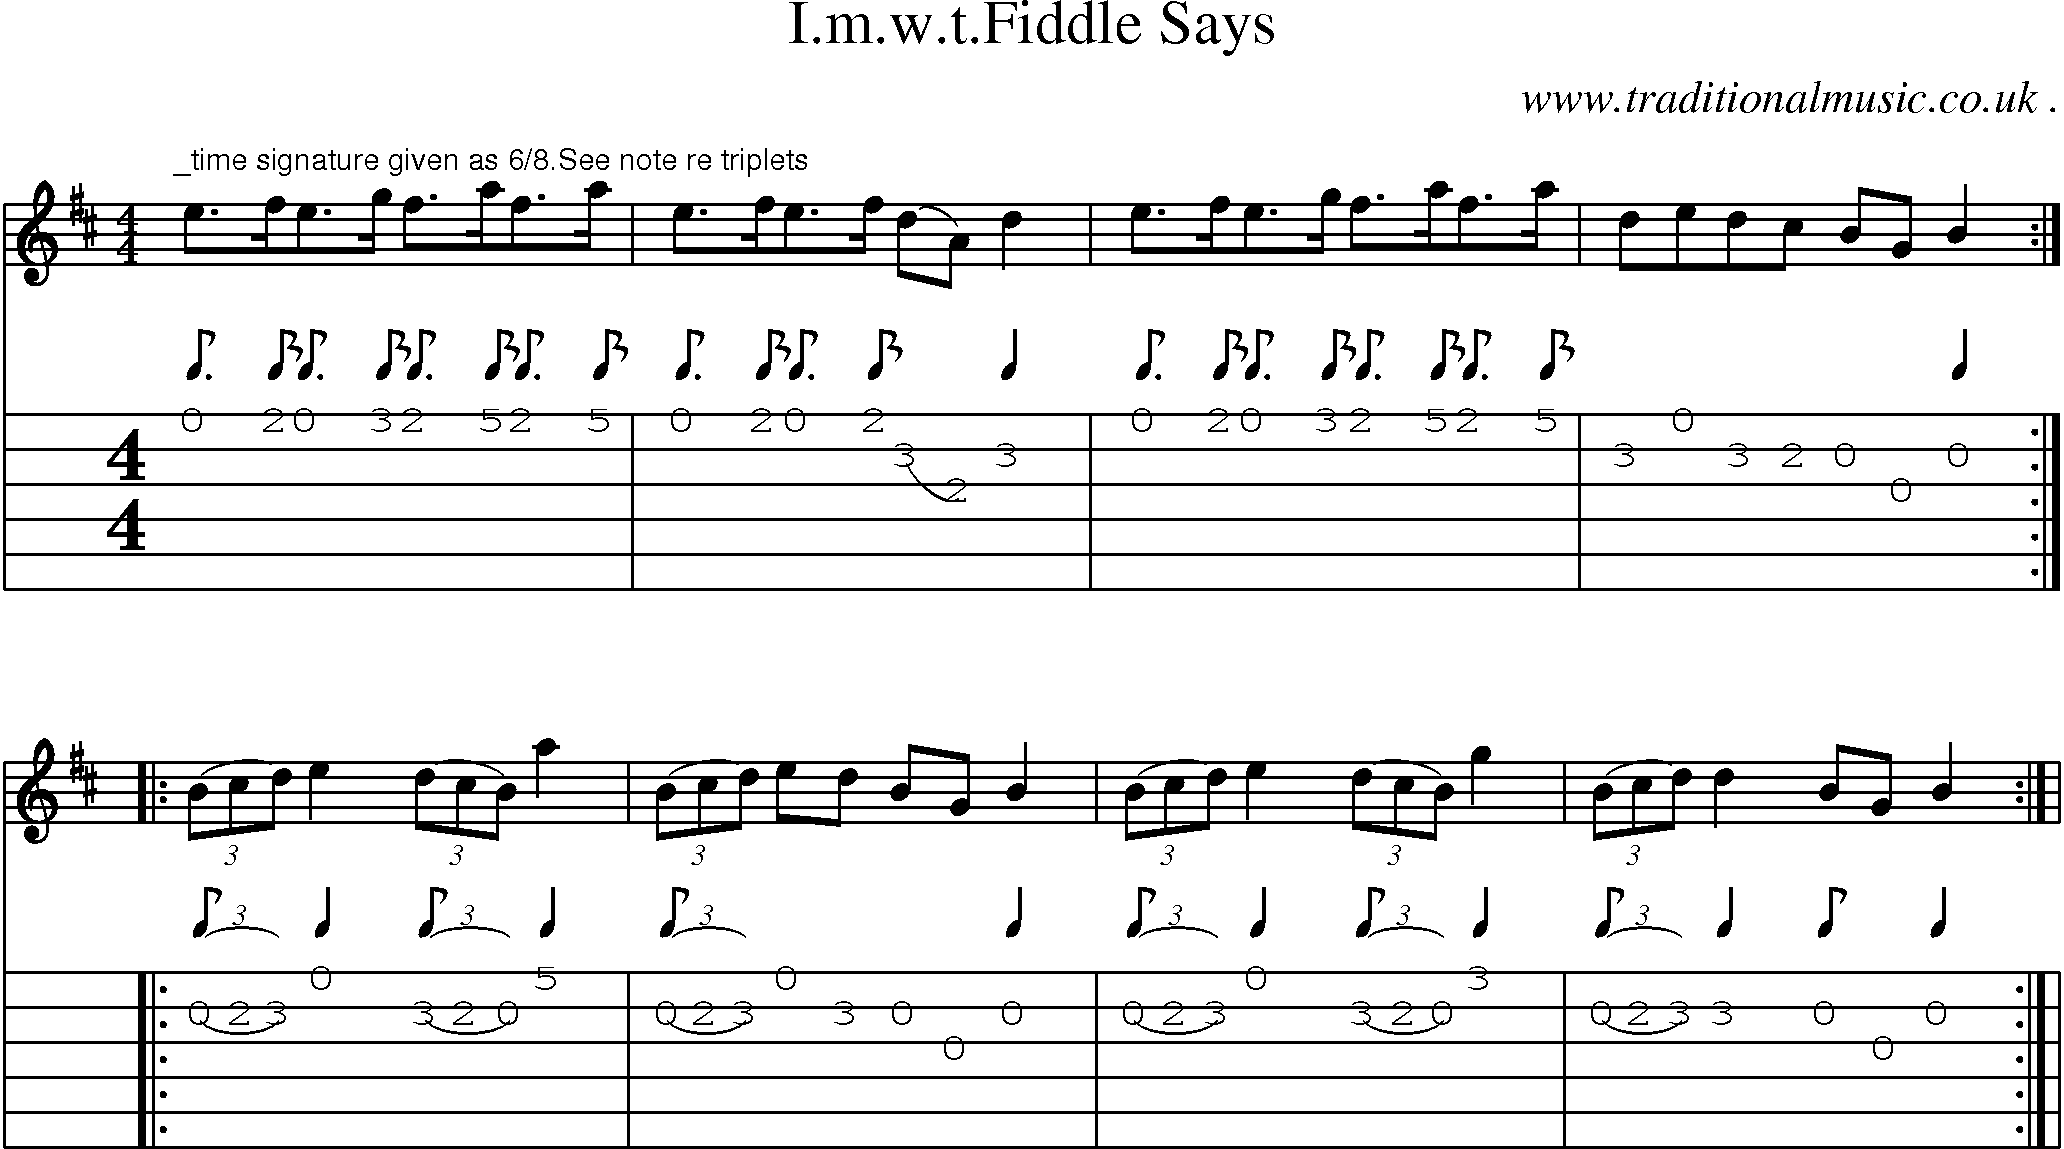 Sheet-Music and Guitar Tabs for Imwtfiddle Says